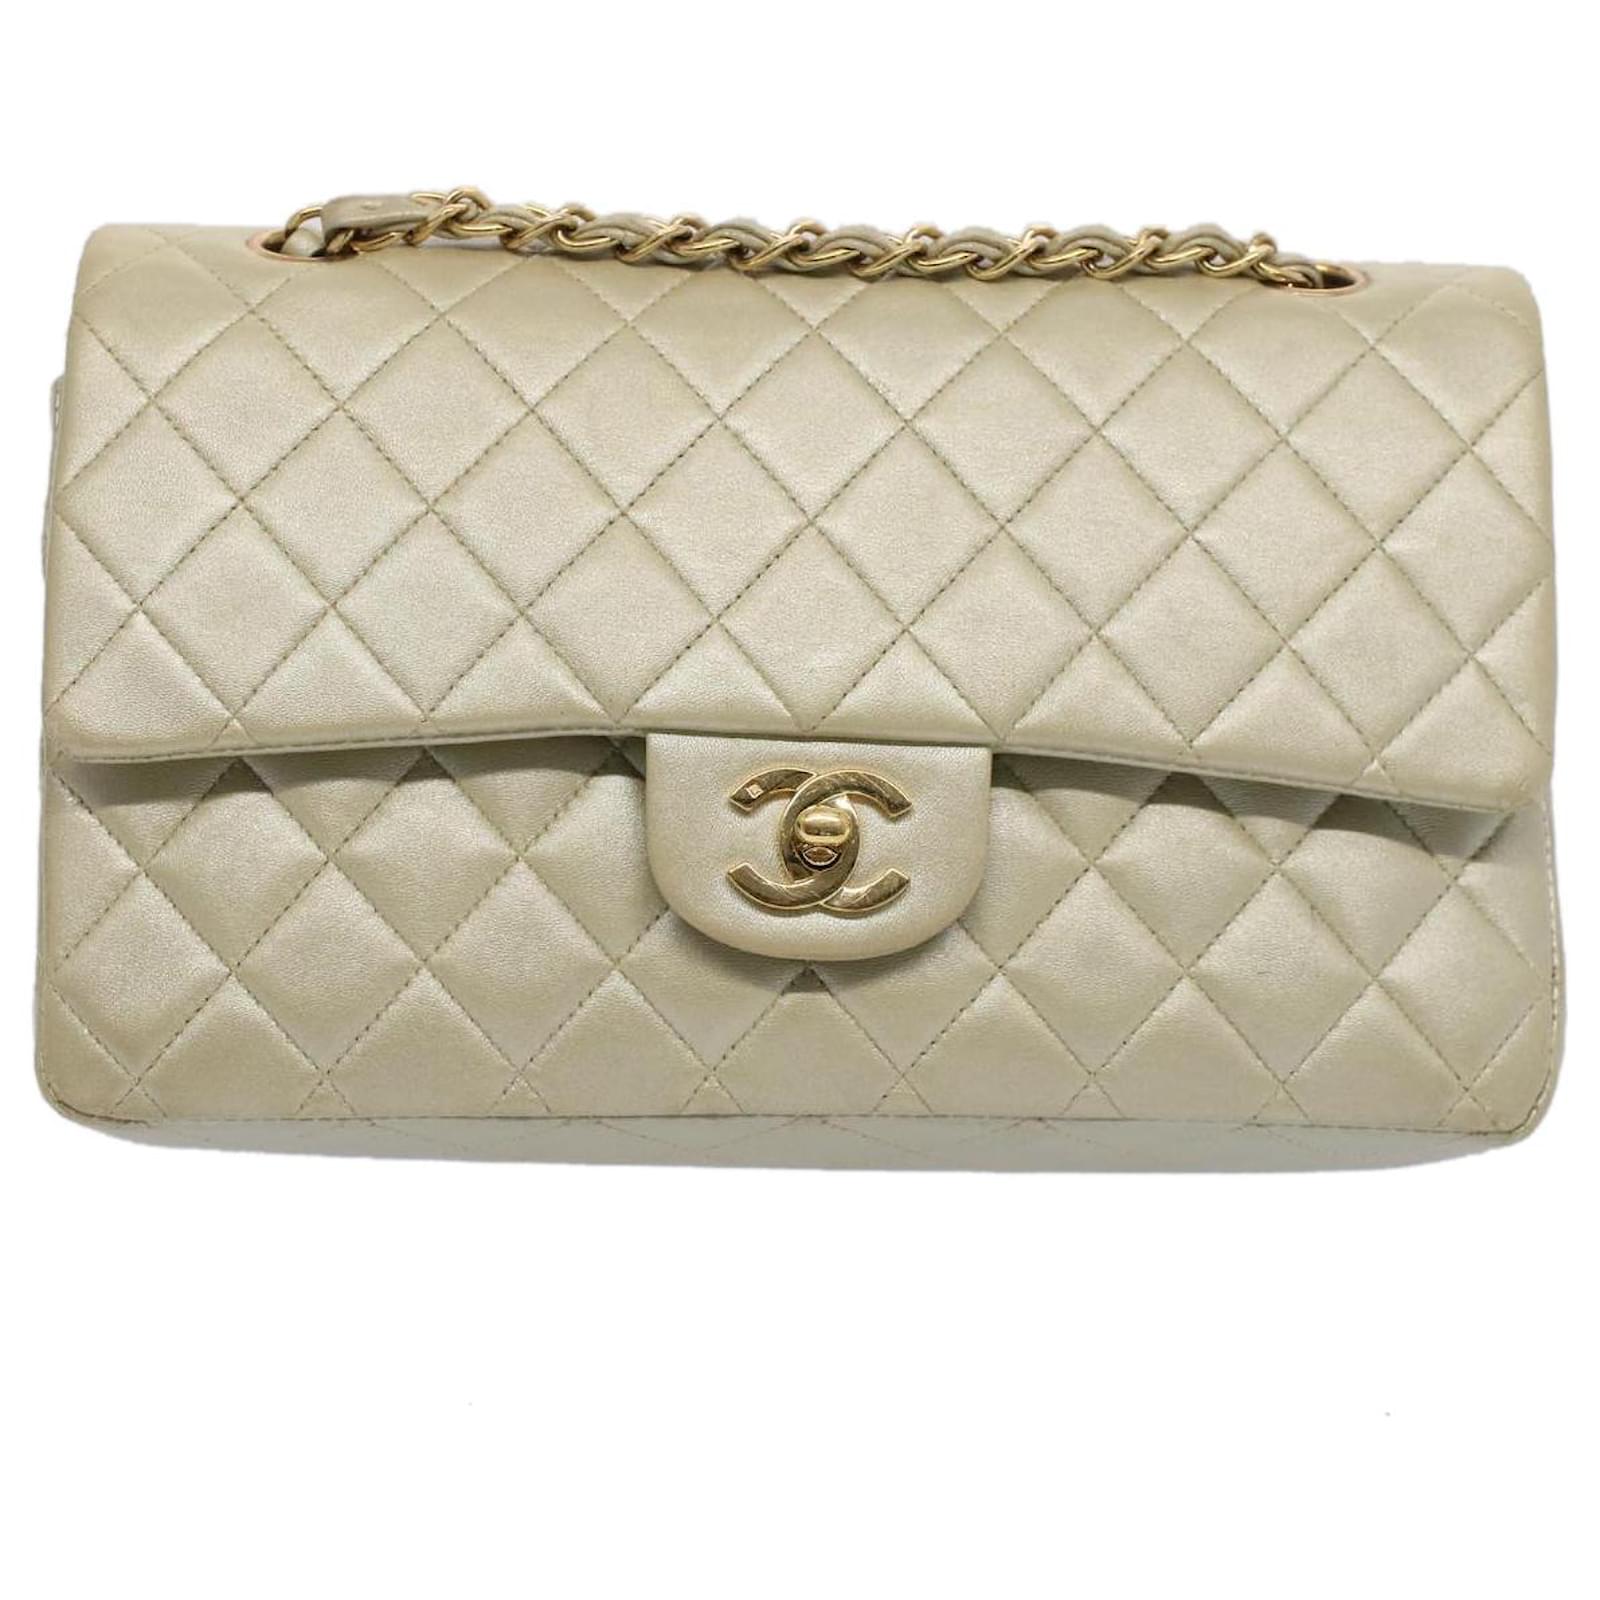 Handbags Chanel Chanel Matelasse Shoulder Bag Quilted Canvas Black White Red CC Auth 50442a